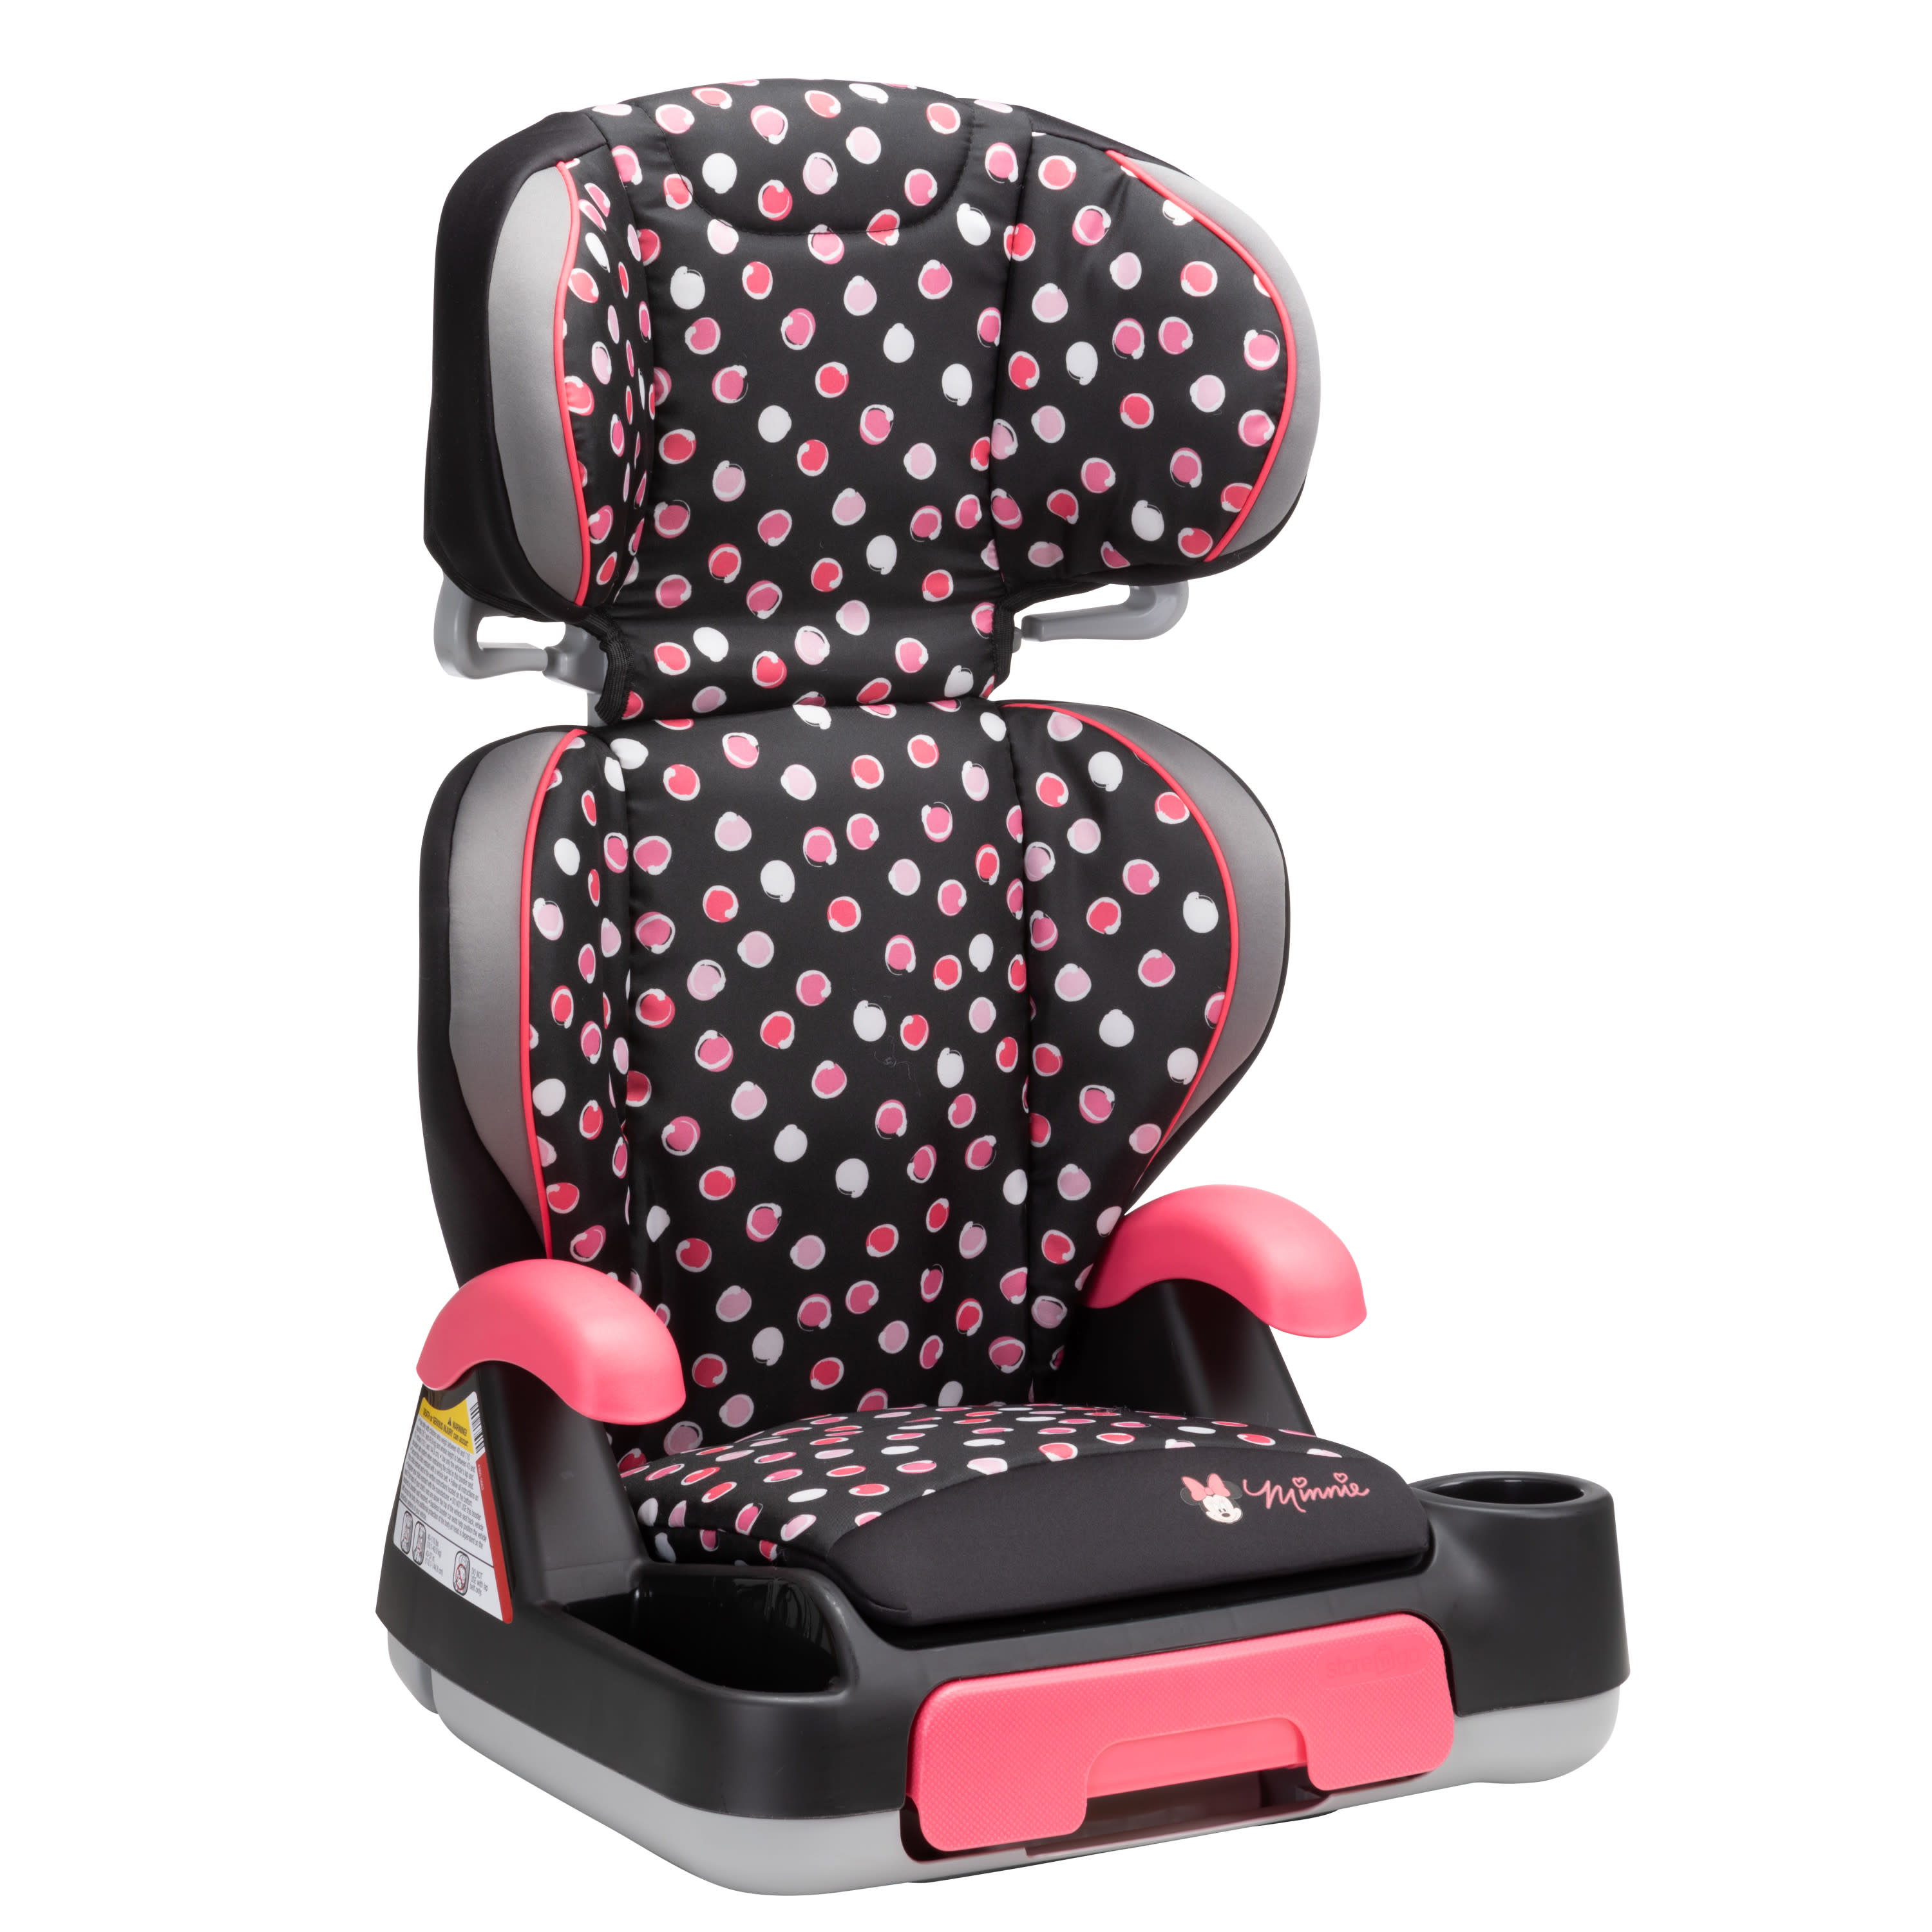 Disney Baby Store 'n Go Sport Booster Car Seat, Minnie Mash Up - image 10 of 21